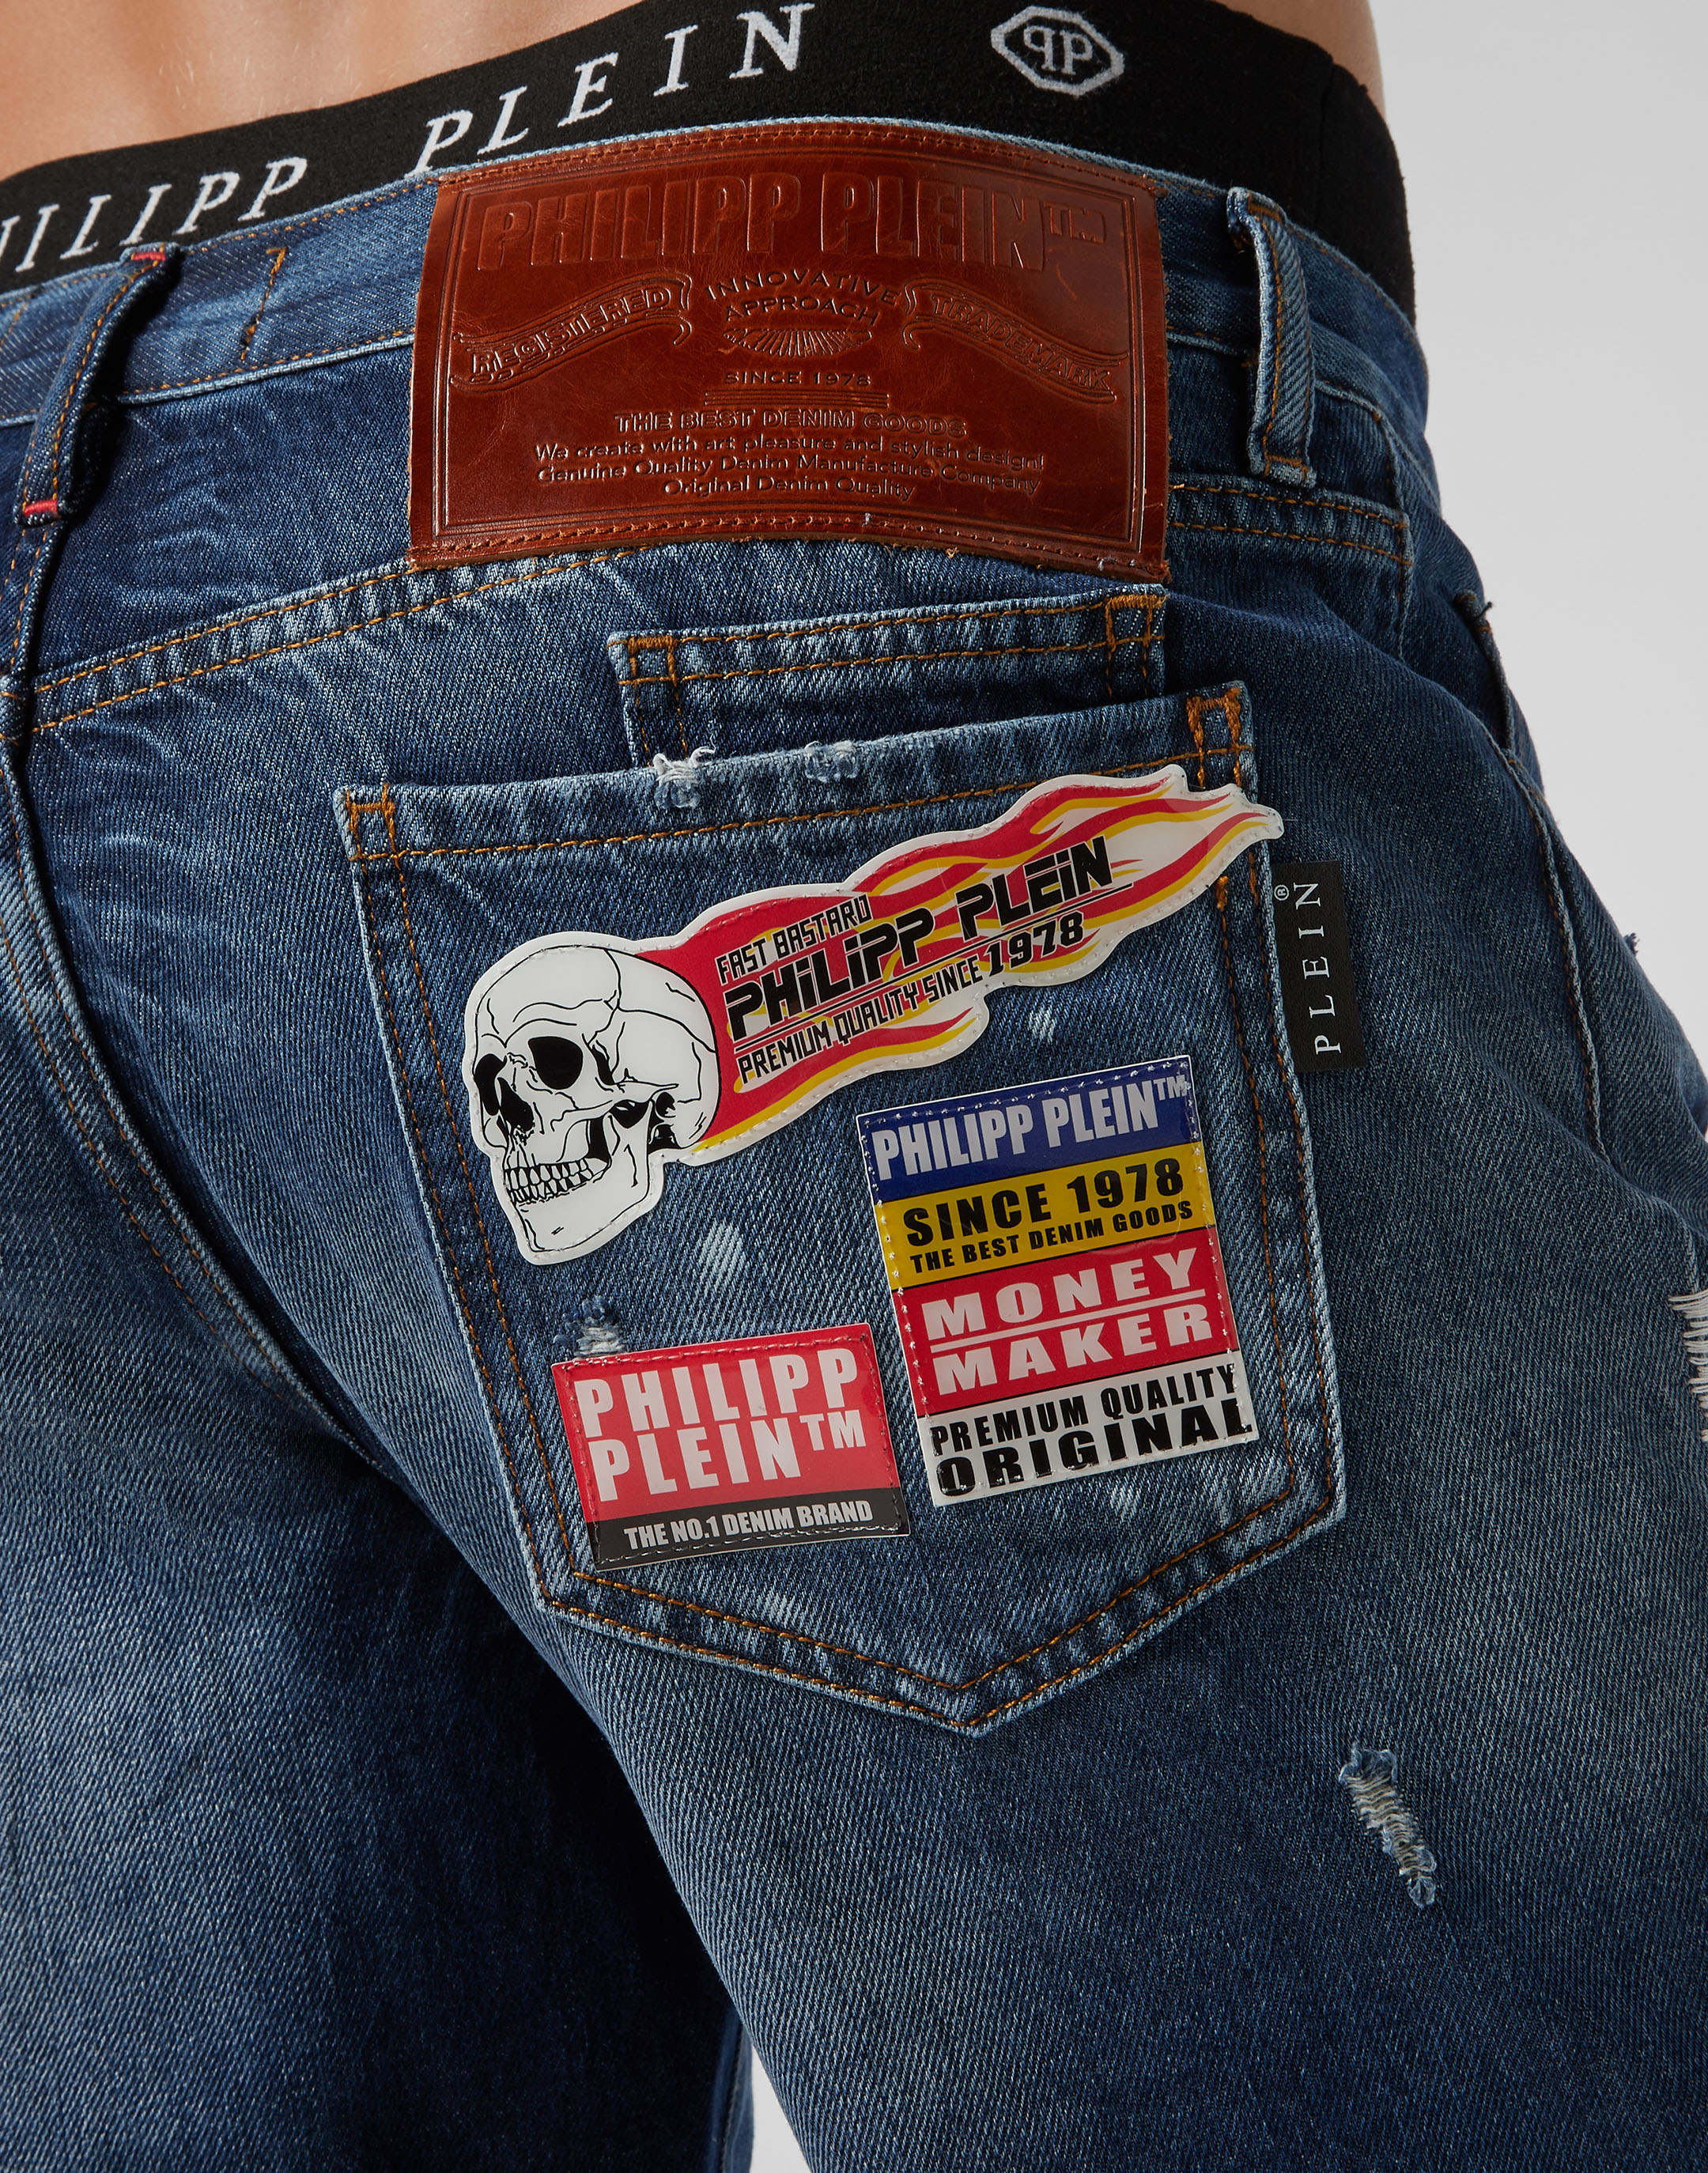 Details more than 186 fire jeans brand